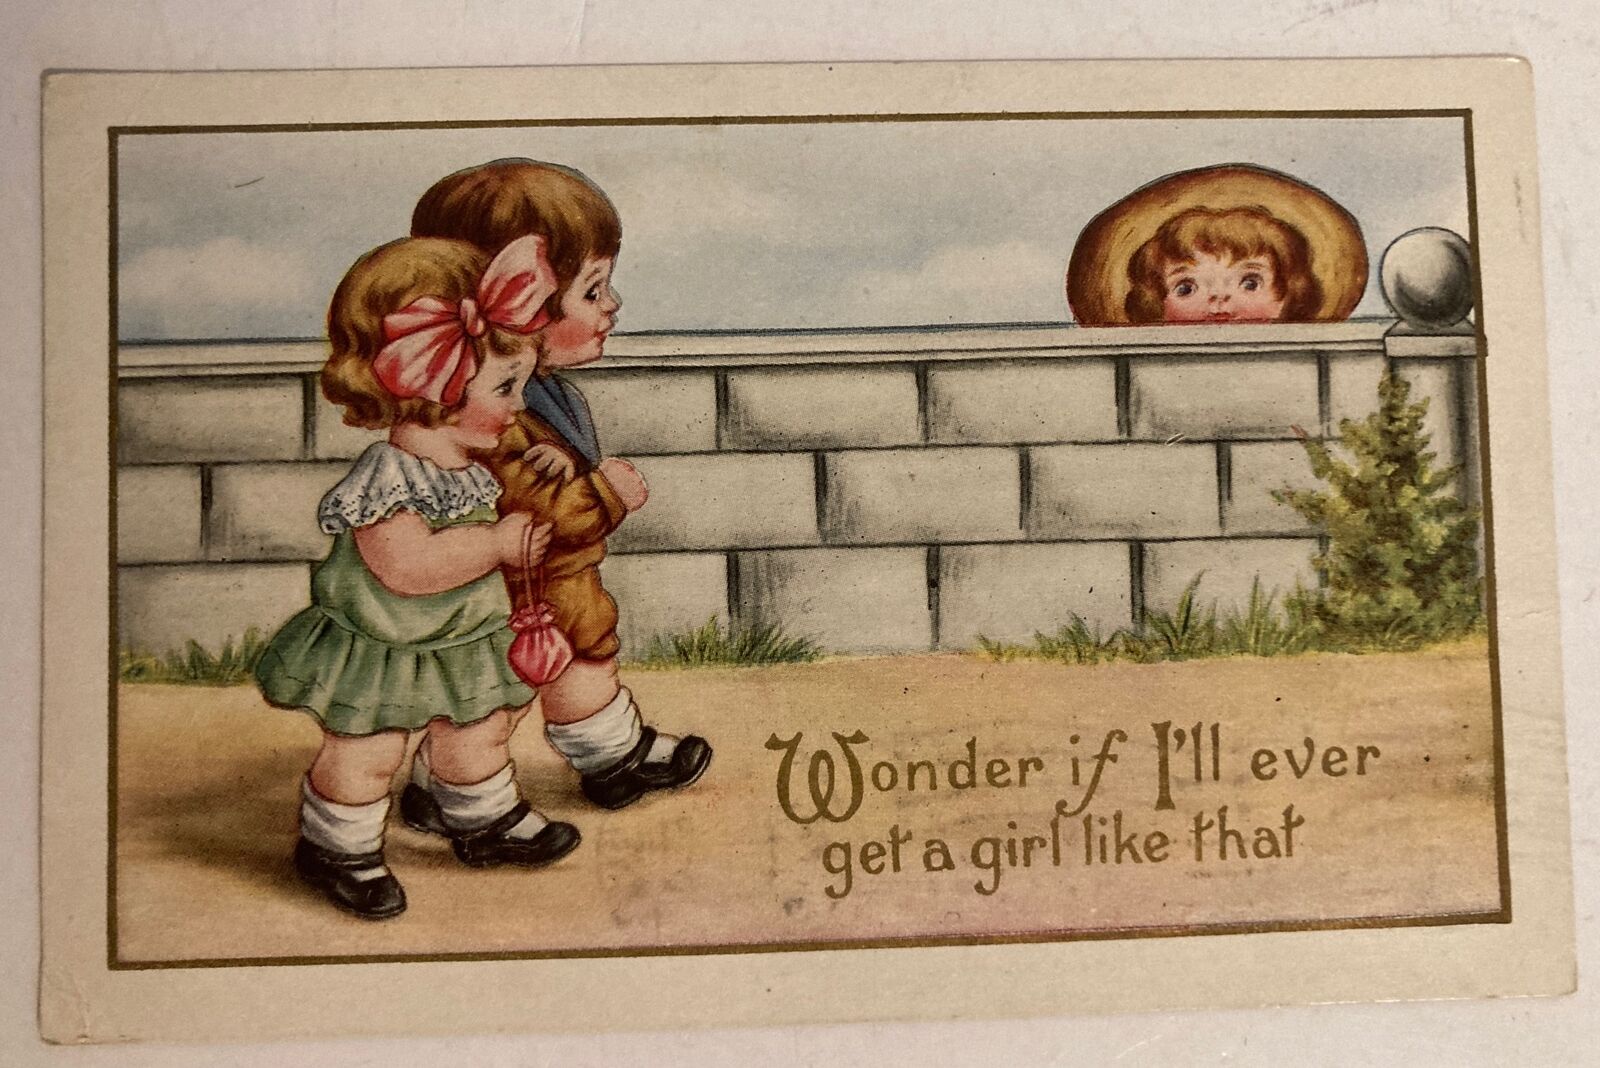 1917 Wonder If I'll Ever Get A Girl Like That~Whitney Worcester PM Postcard